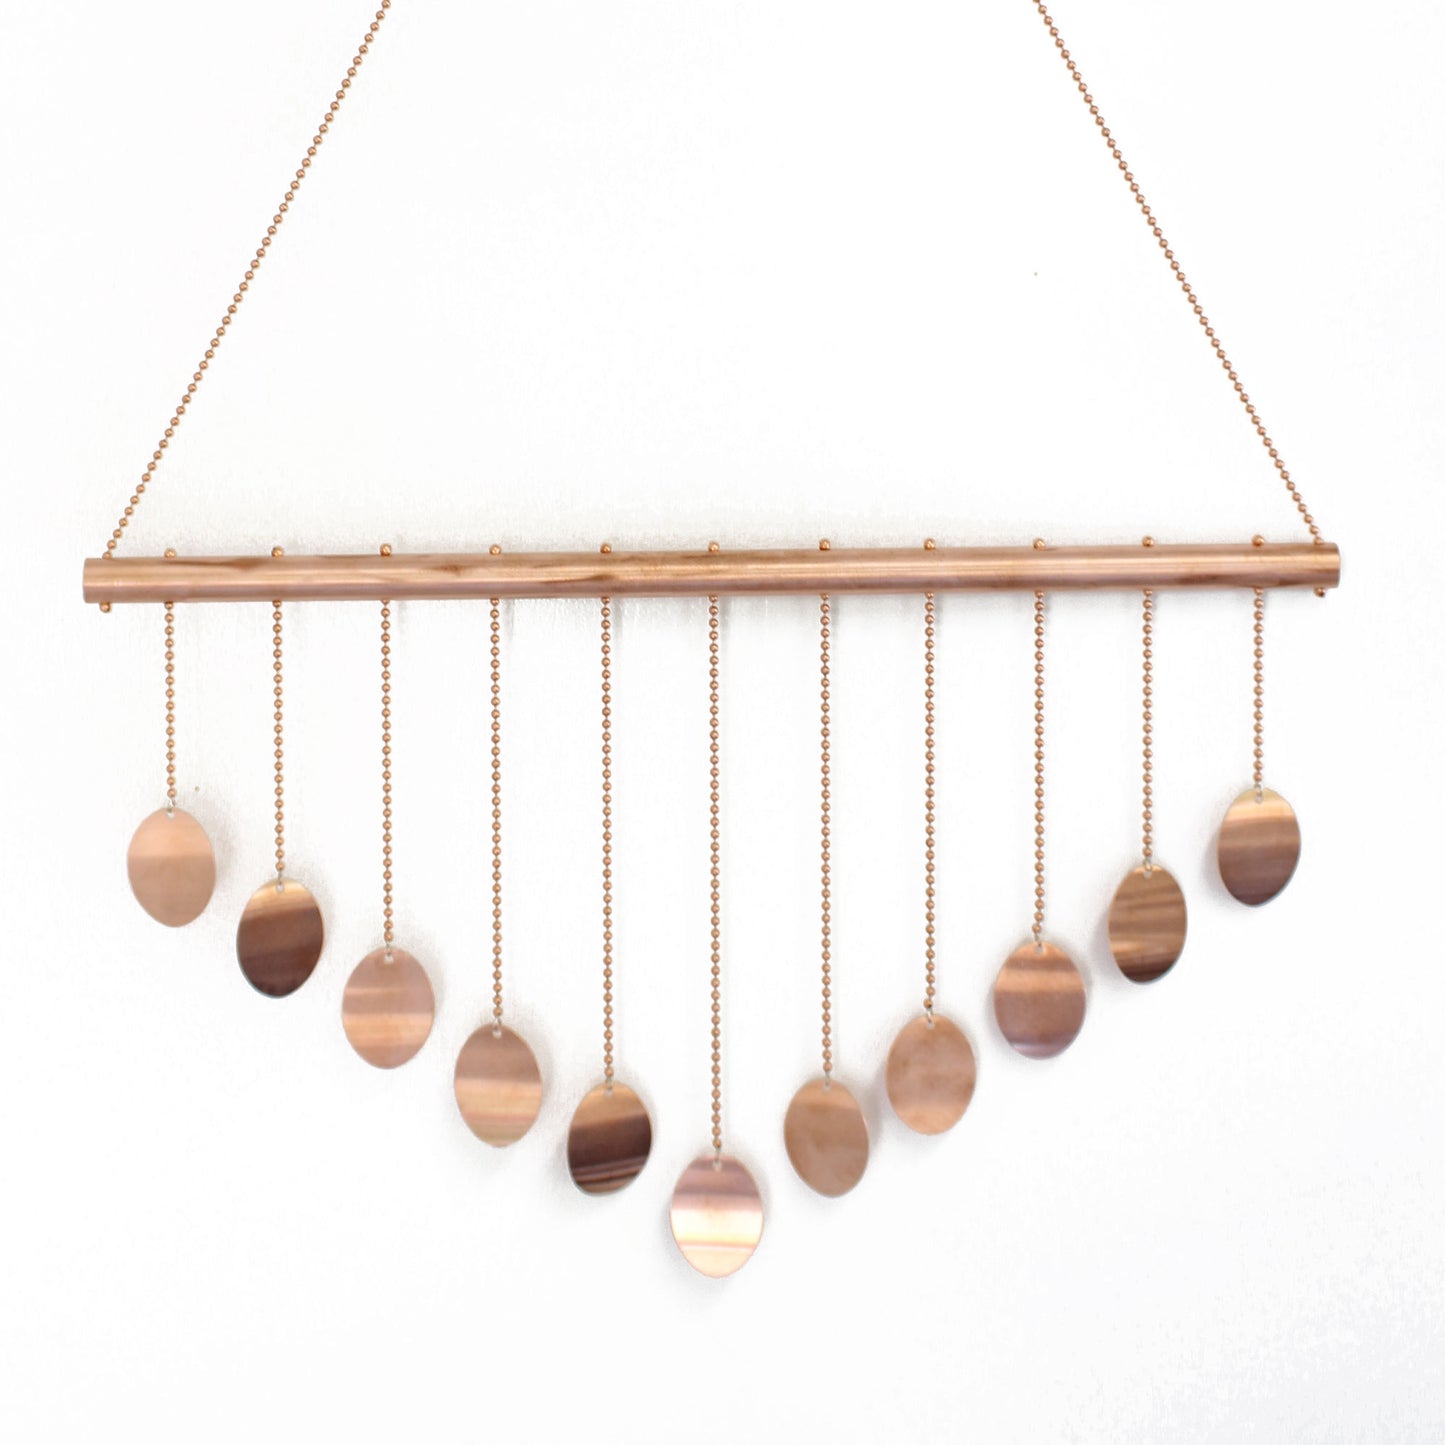 Copper Wind Chime with Circles, Hanging Mobile 28" L